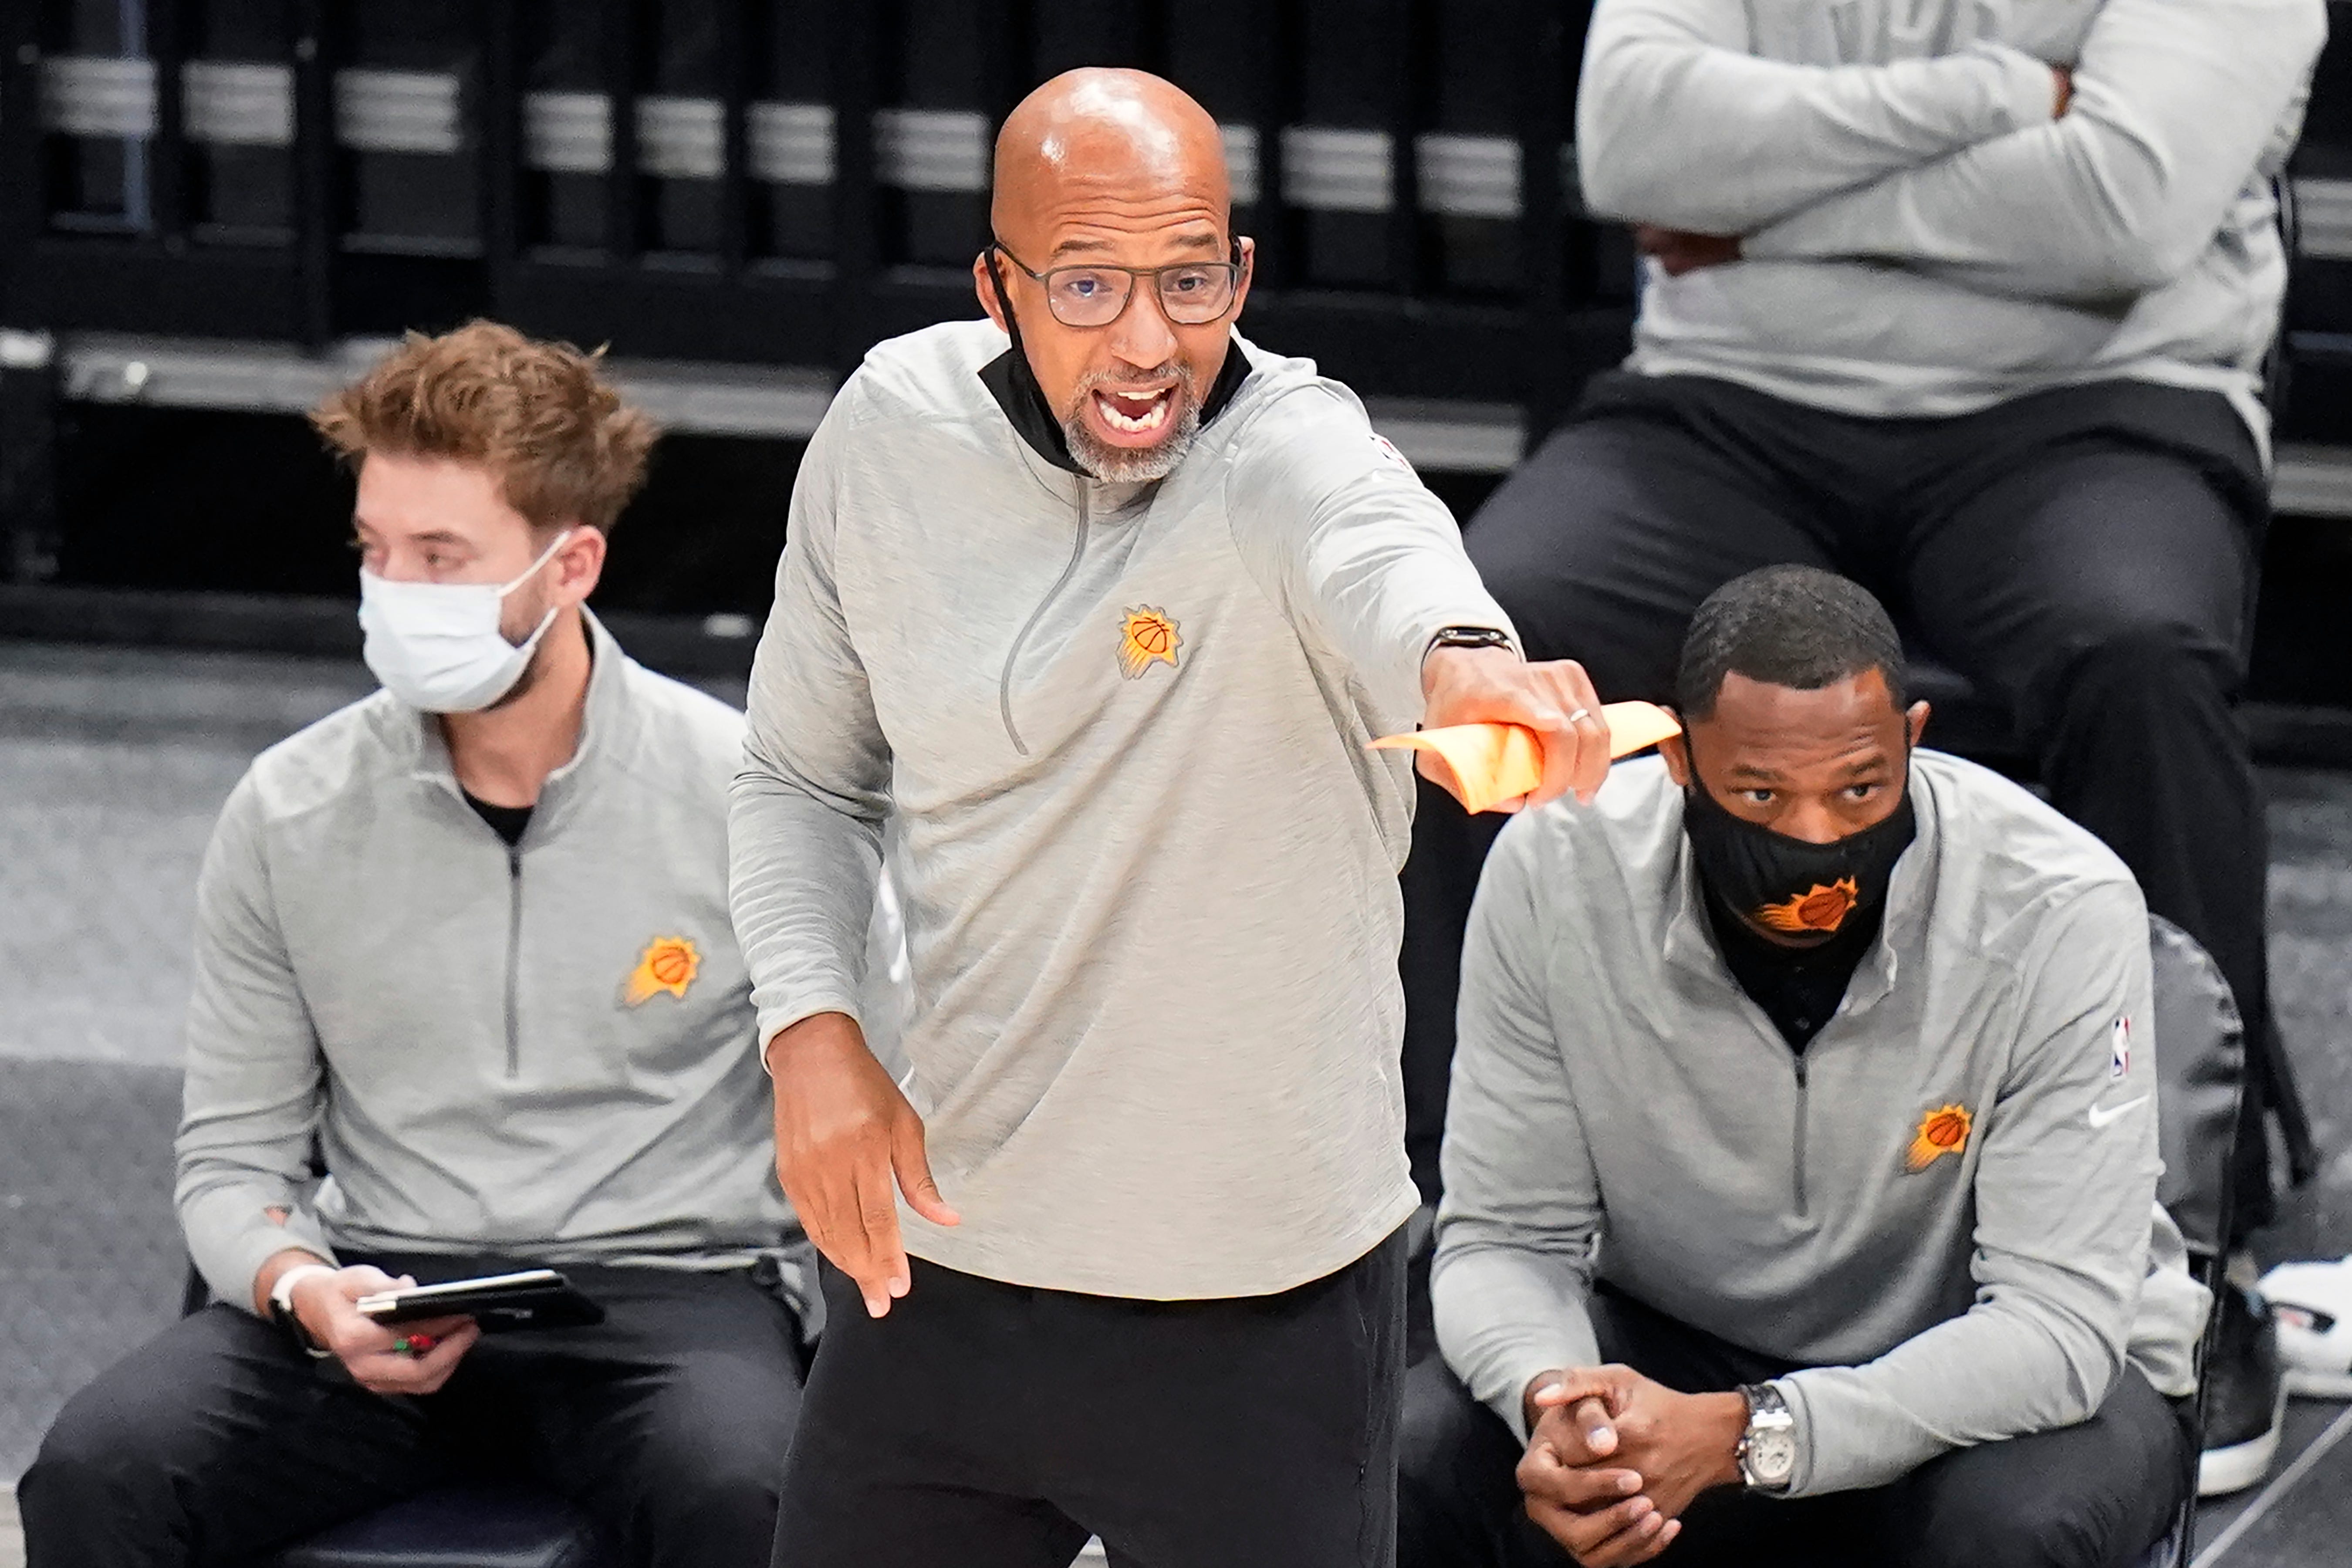 Monty Williams returns to Suns after missing practice for personal reasons